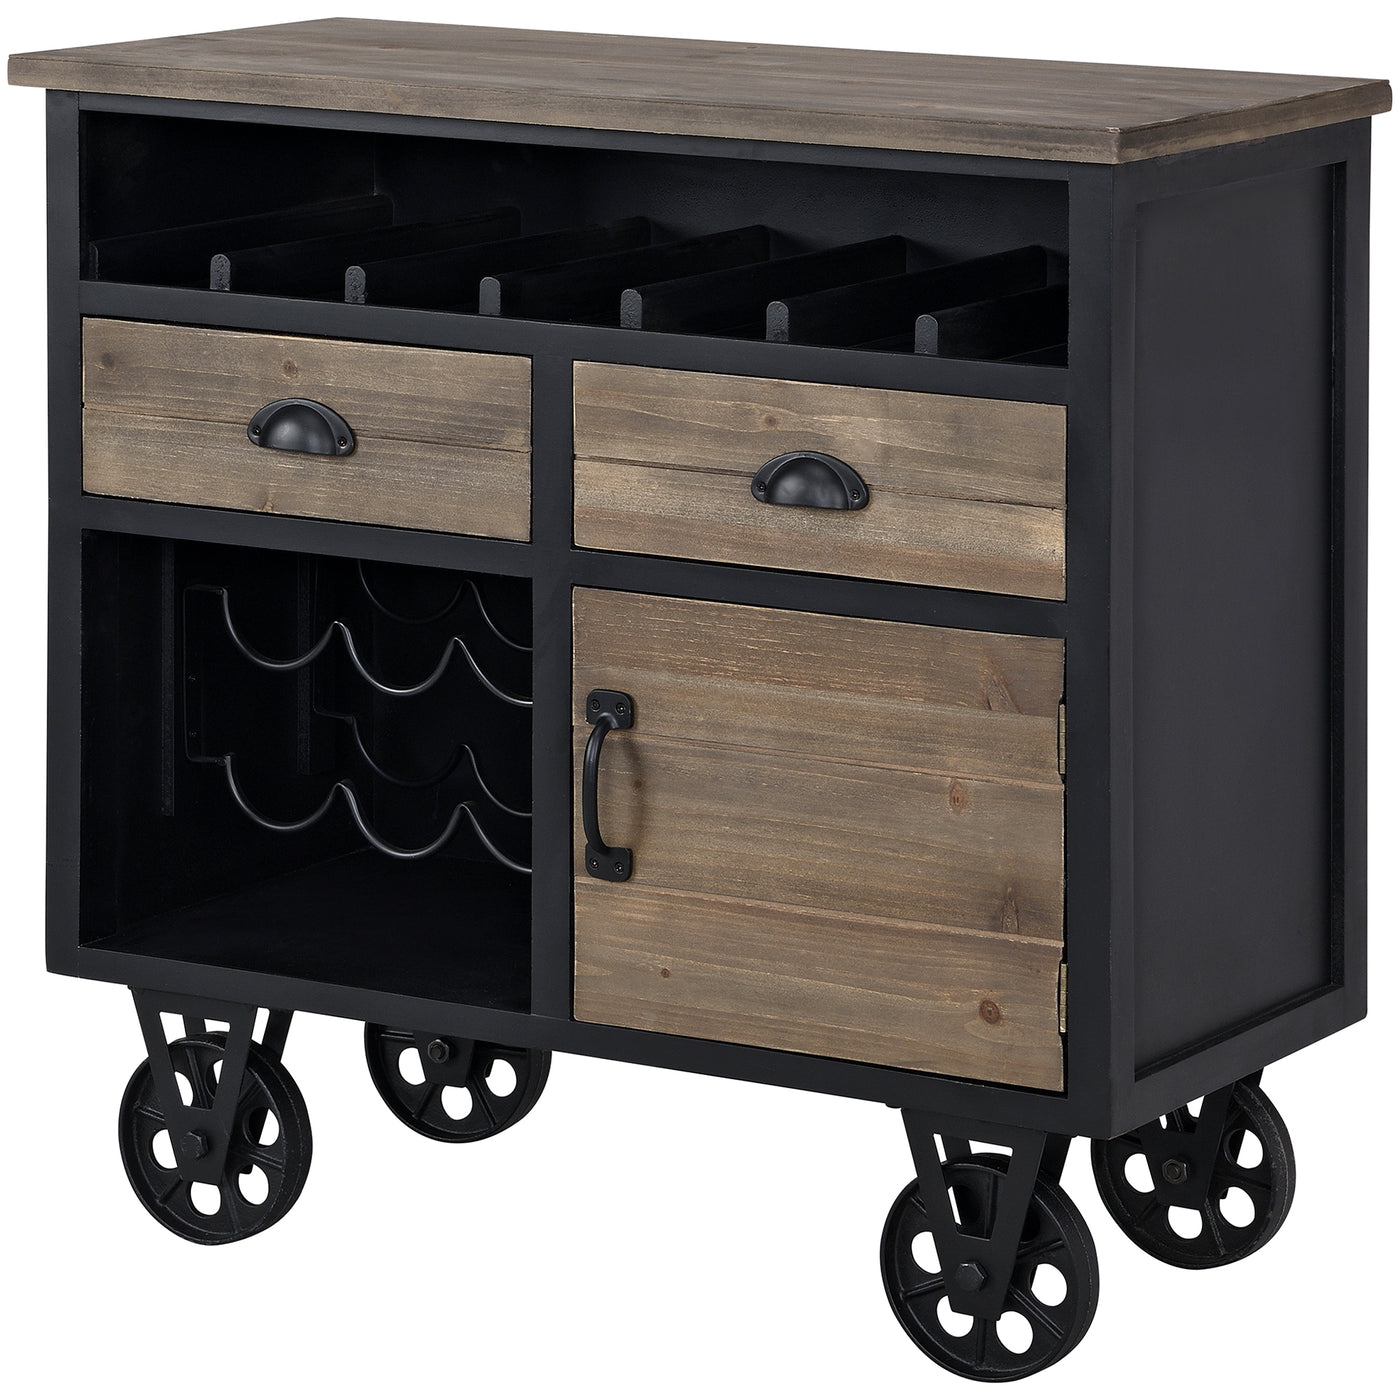 FirsTime & Co. Black And Brown Logan Bar Cart, Farmhouse Style, Made of Wood